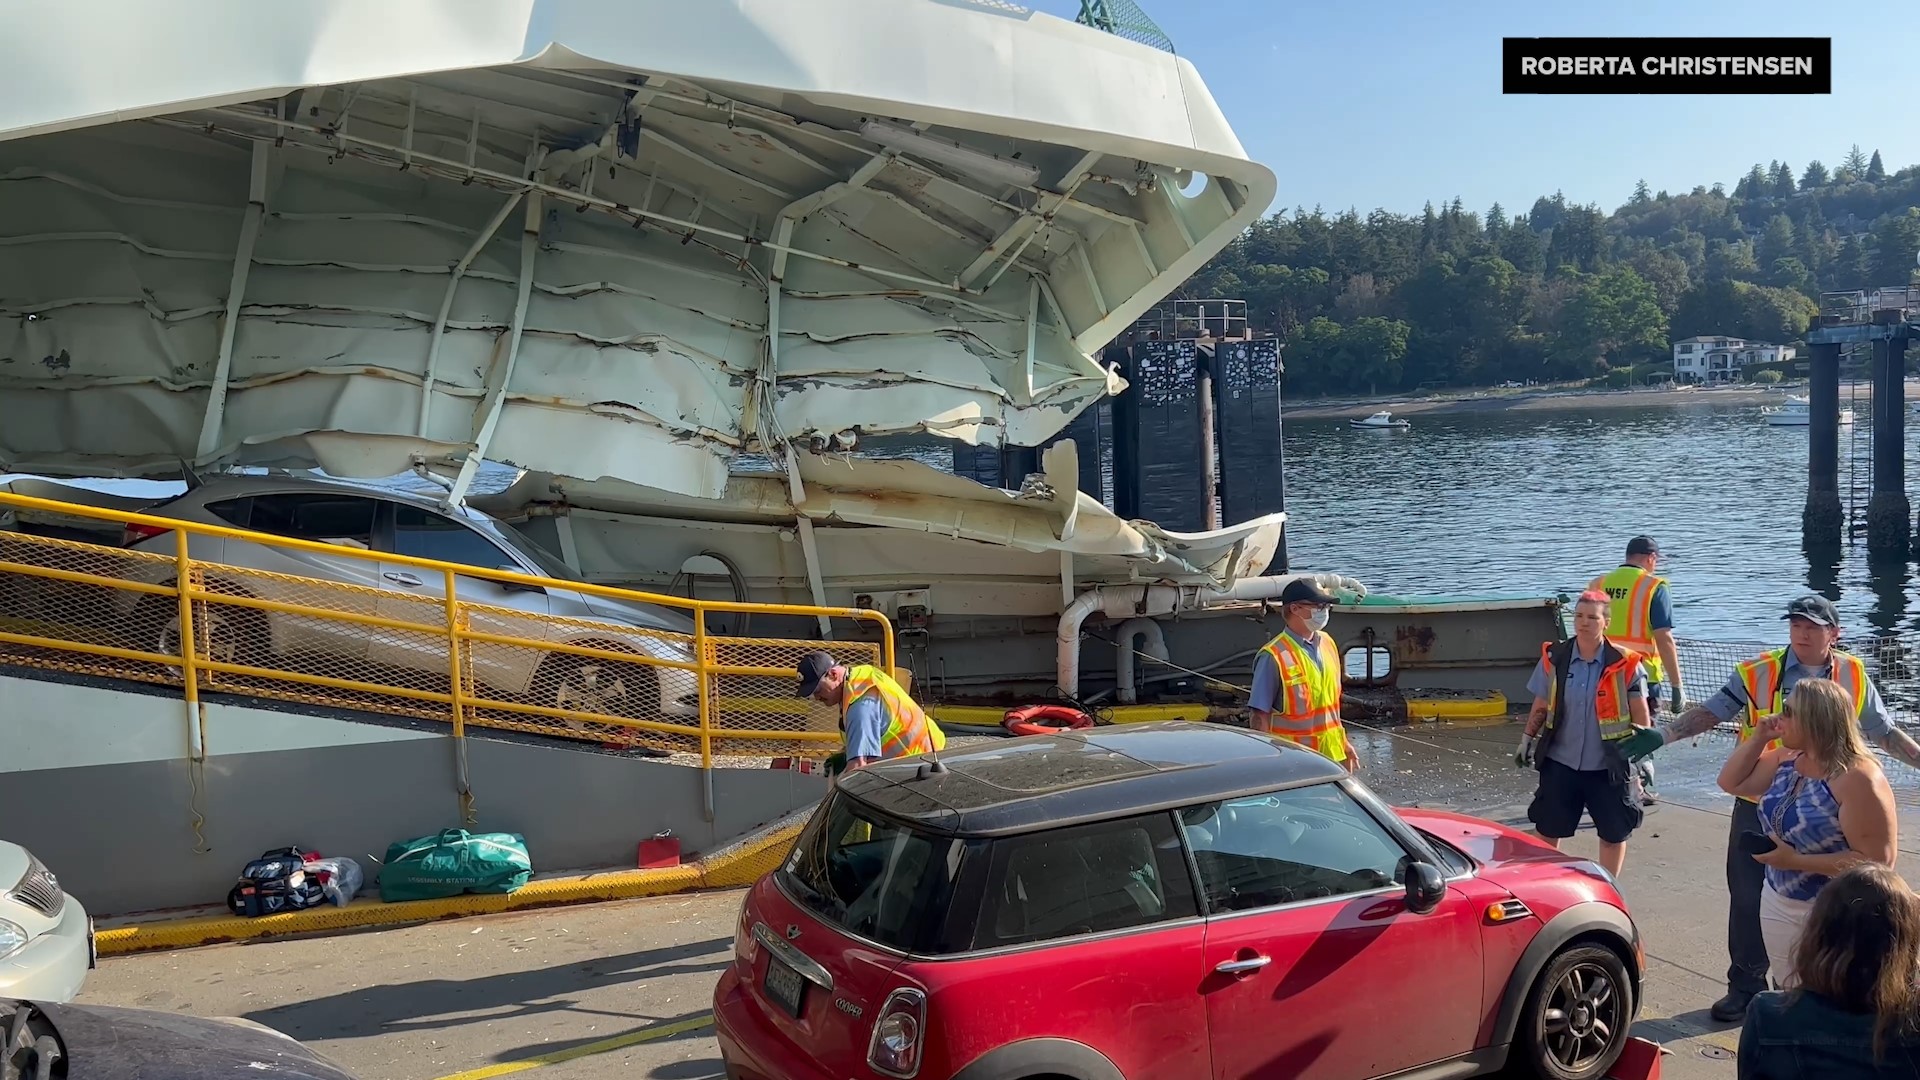 Investigators said the captain did not recall what happened and seemed unaware of how the ferry struck the dock. The collision caused over $10.3 million in damages.